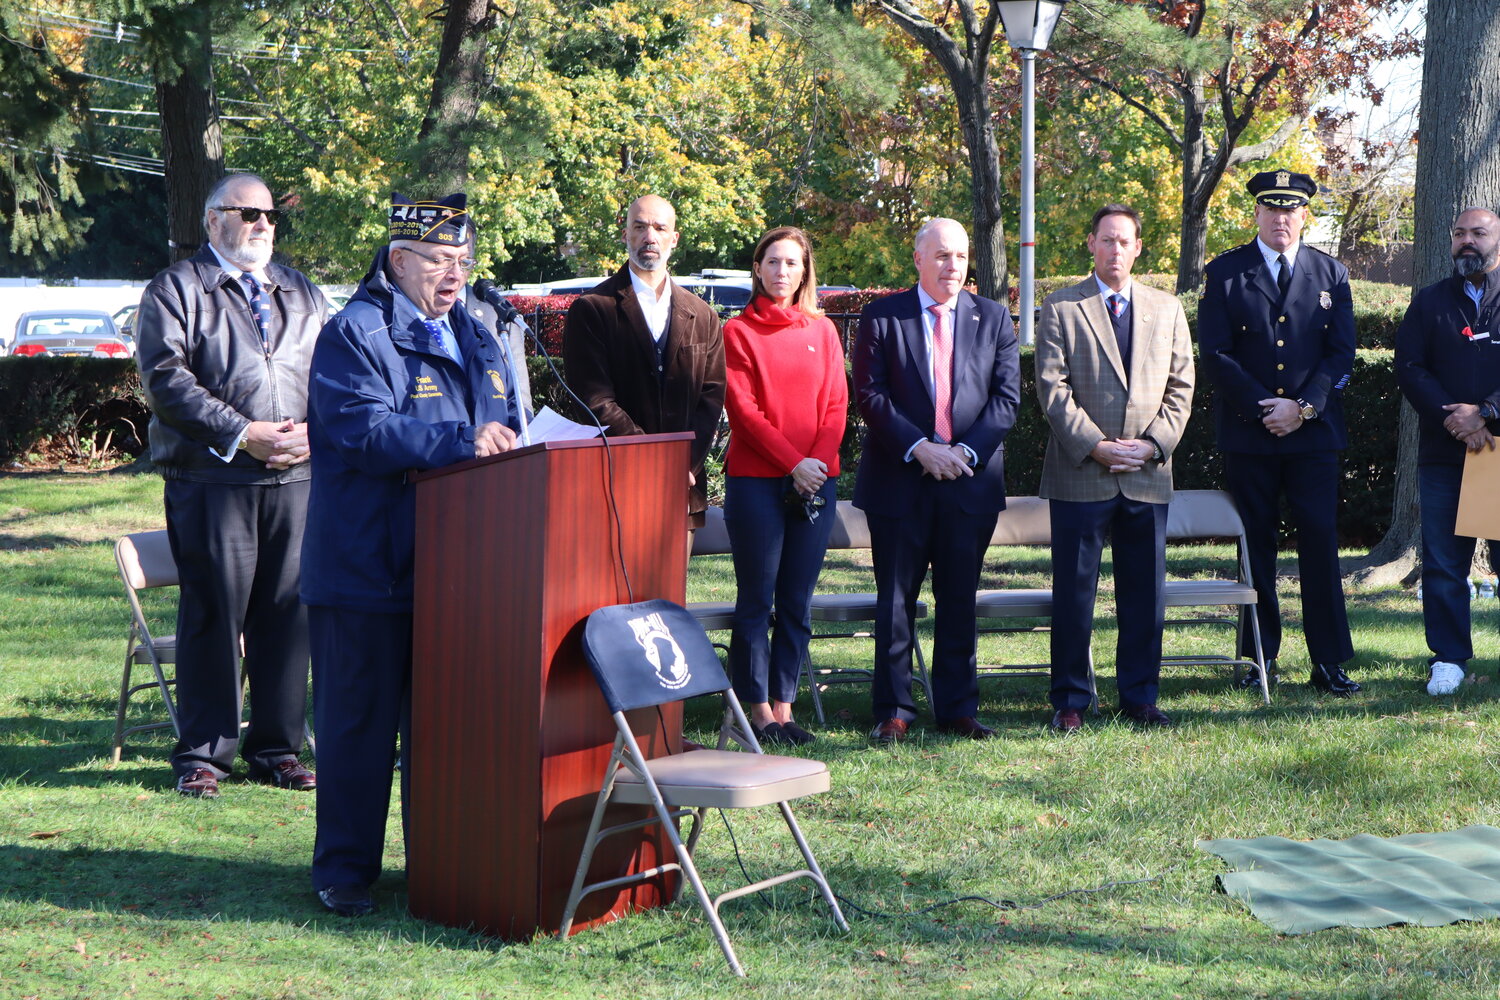 American Legion Post 303 Commander Frank Colón Jr. speaks about Veterans Day and the importance of taking action to ensure veterans’ well-being. He is joined by Rockville Centre Mayor Francis Murray, Assemblyman Brian Curran, Nassau County Legislator-elect Scott Davis, Village Trustees Katie Conlon, Emilio Grillo, Gregory Shaughnessy and RVC Police Commissioner Randy Dodd.